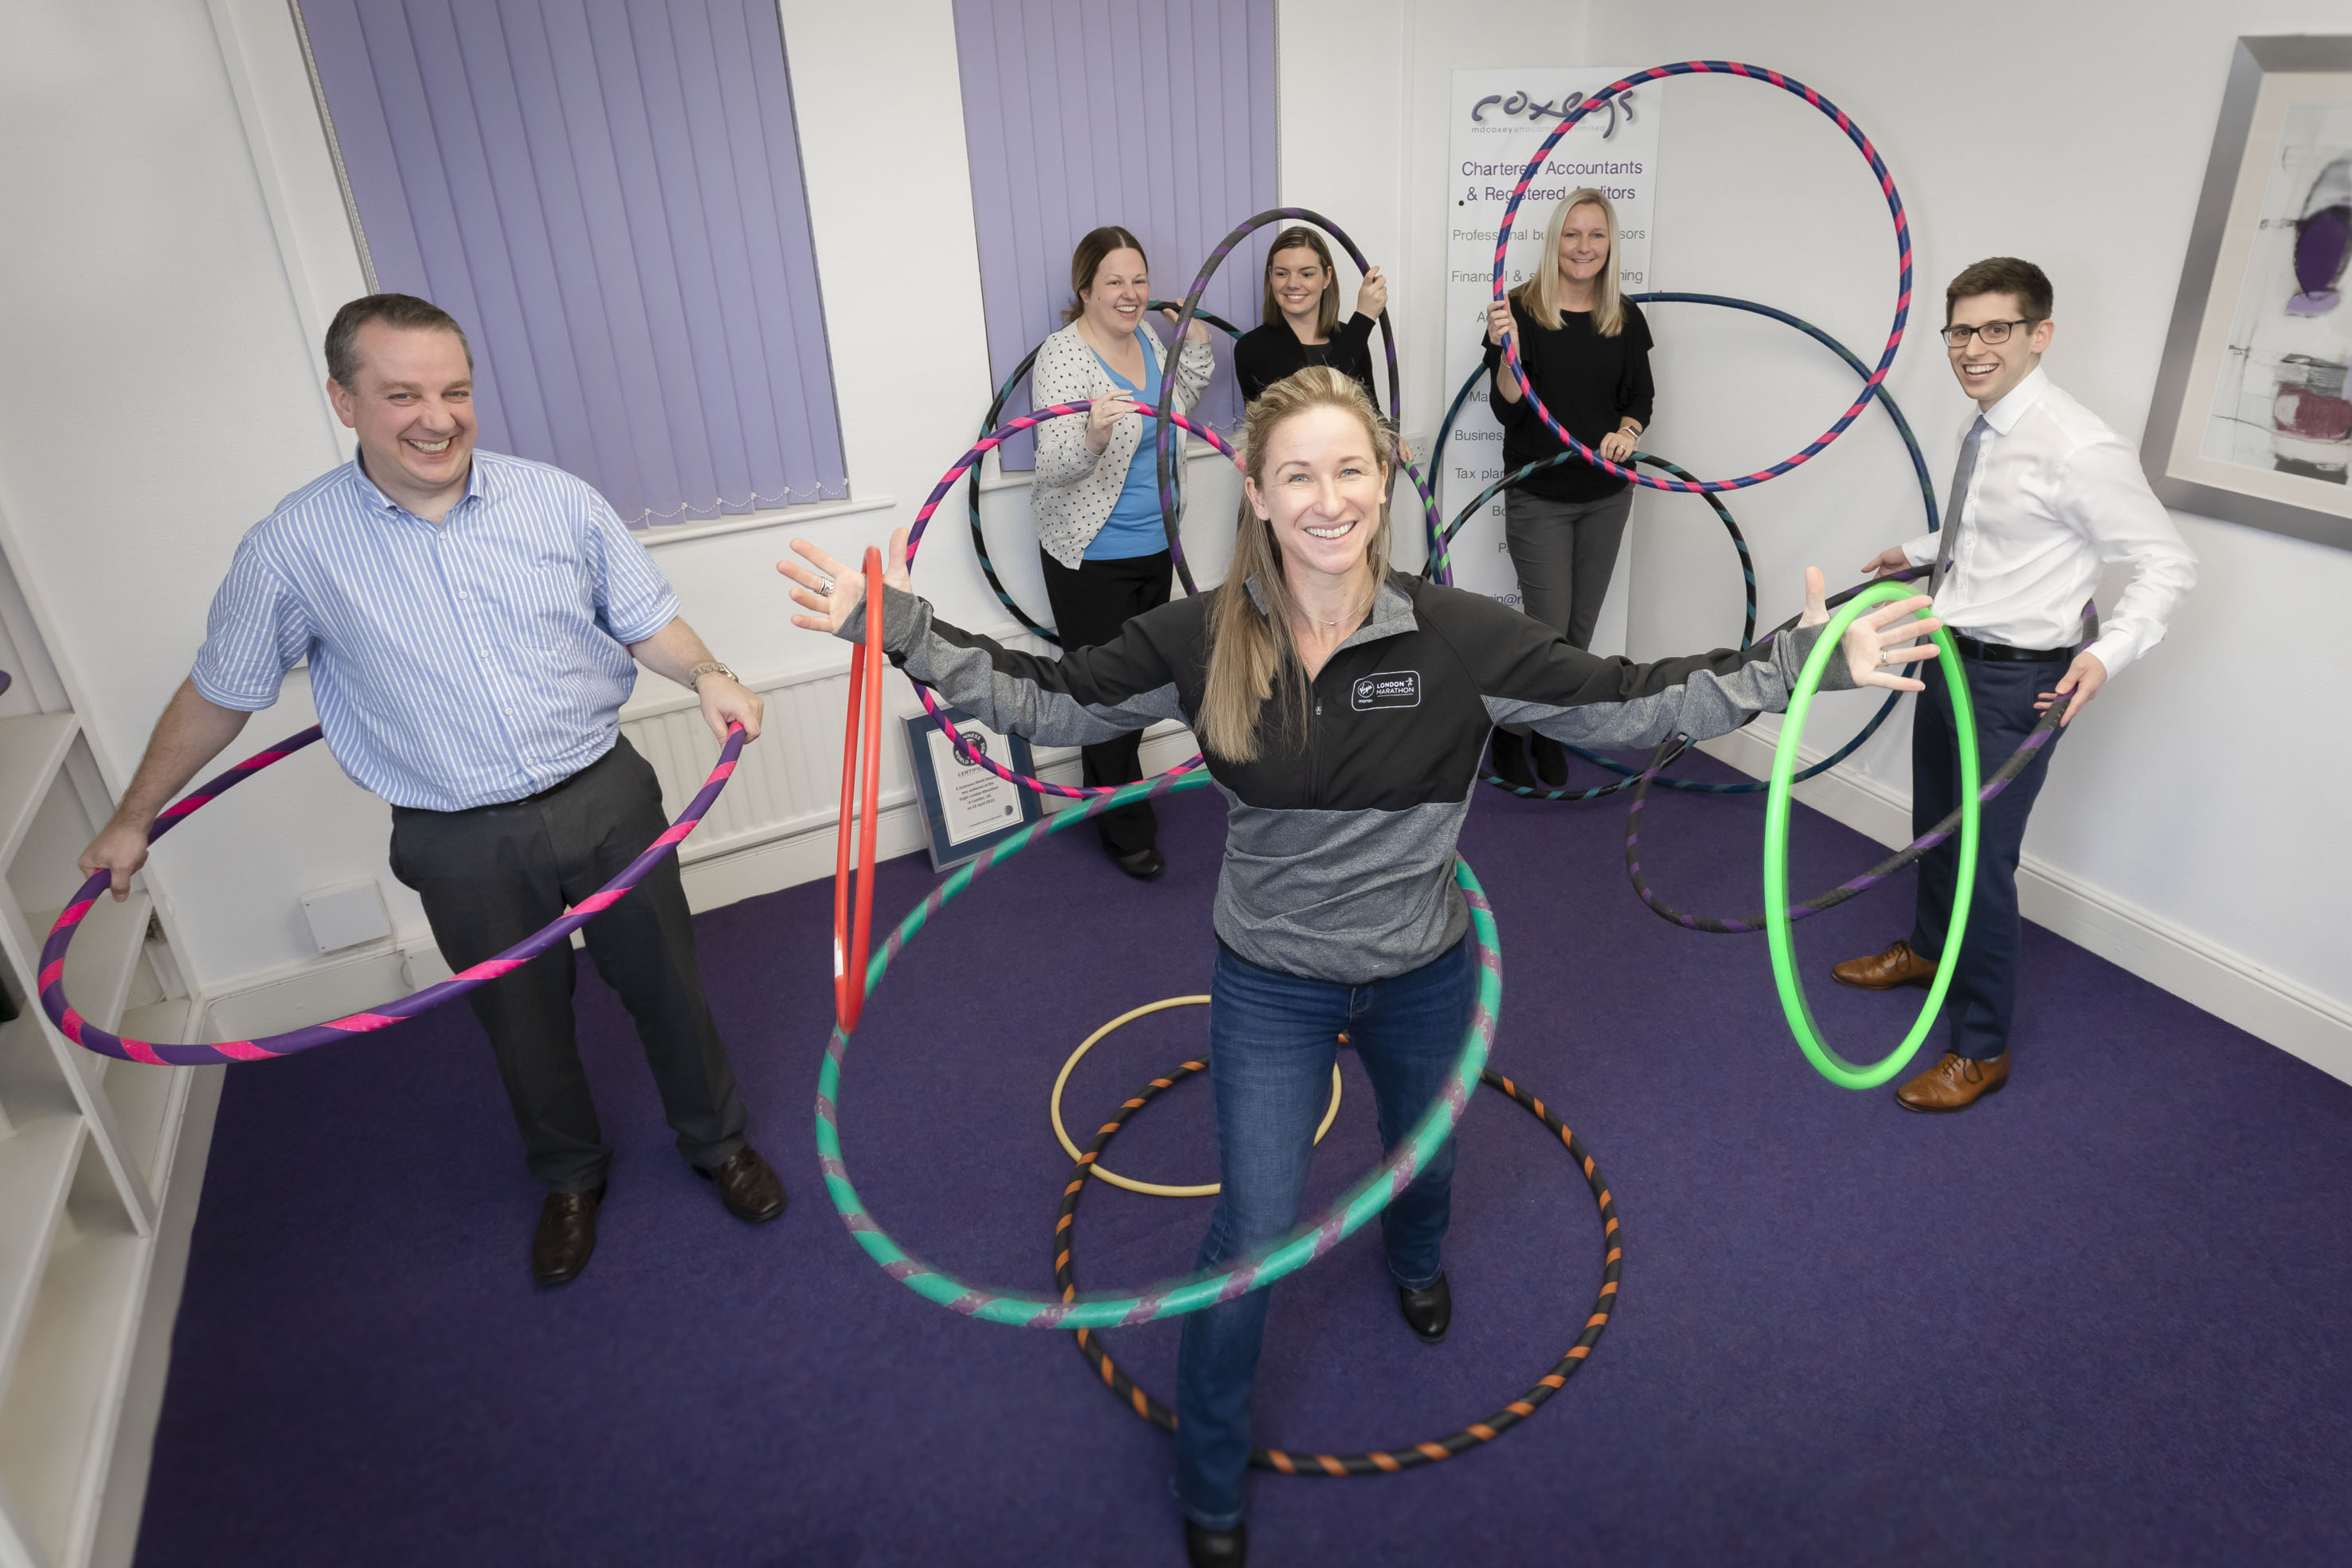 World record-breaking hula hooper building business empire by tacking workplace stress  